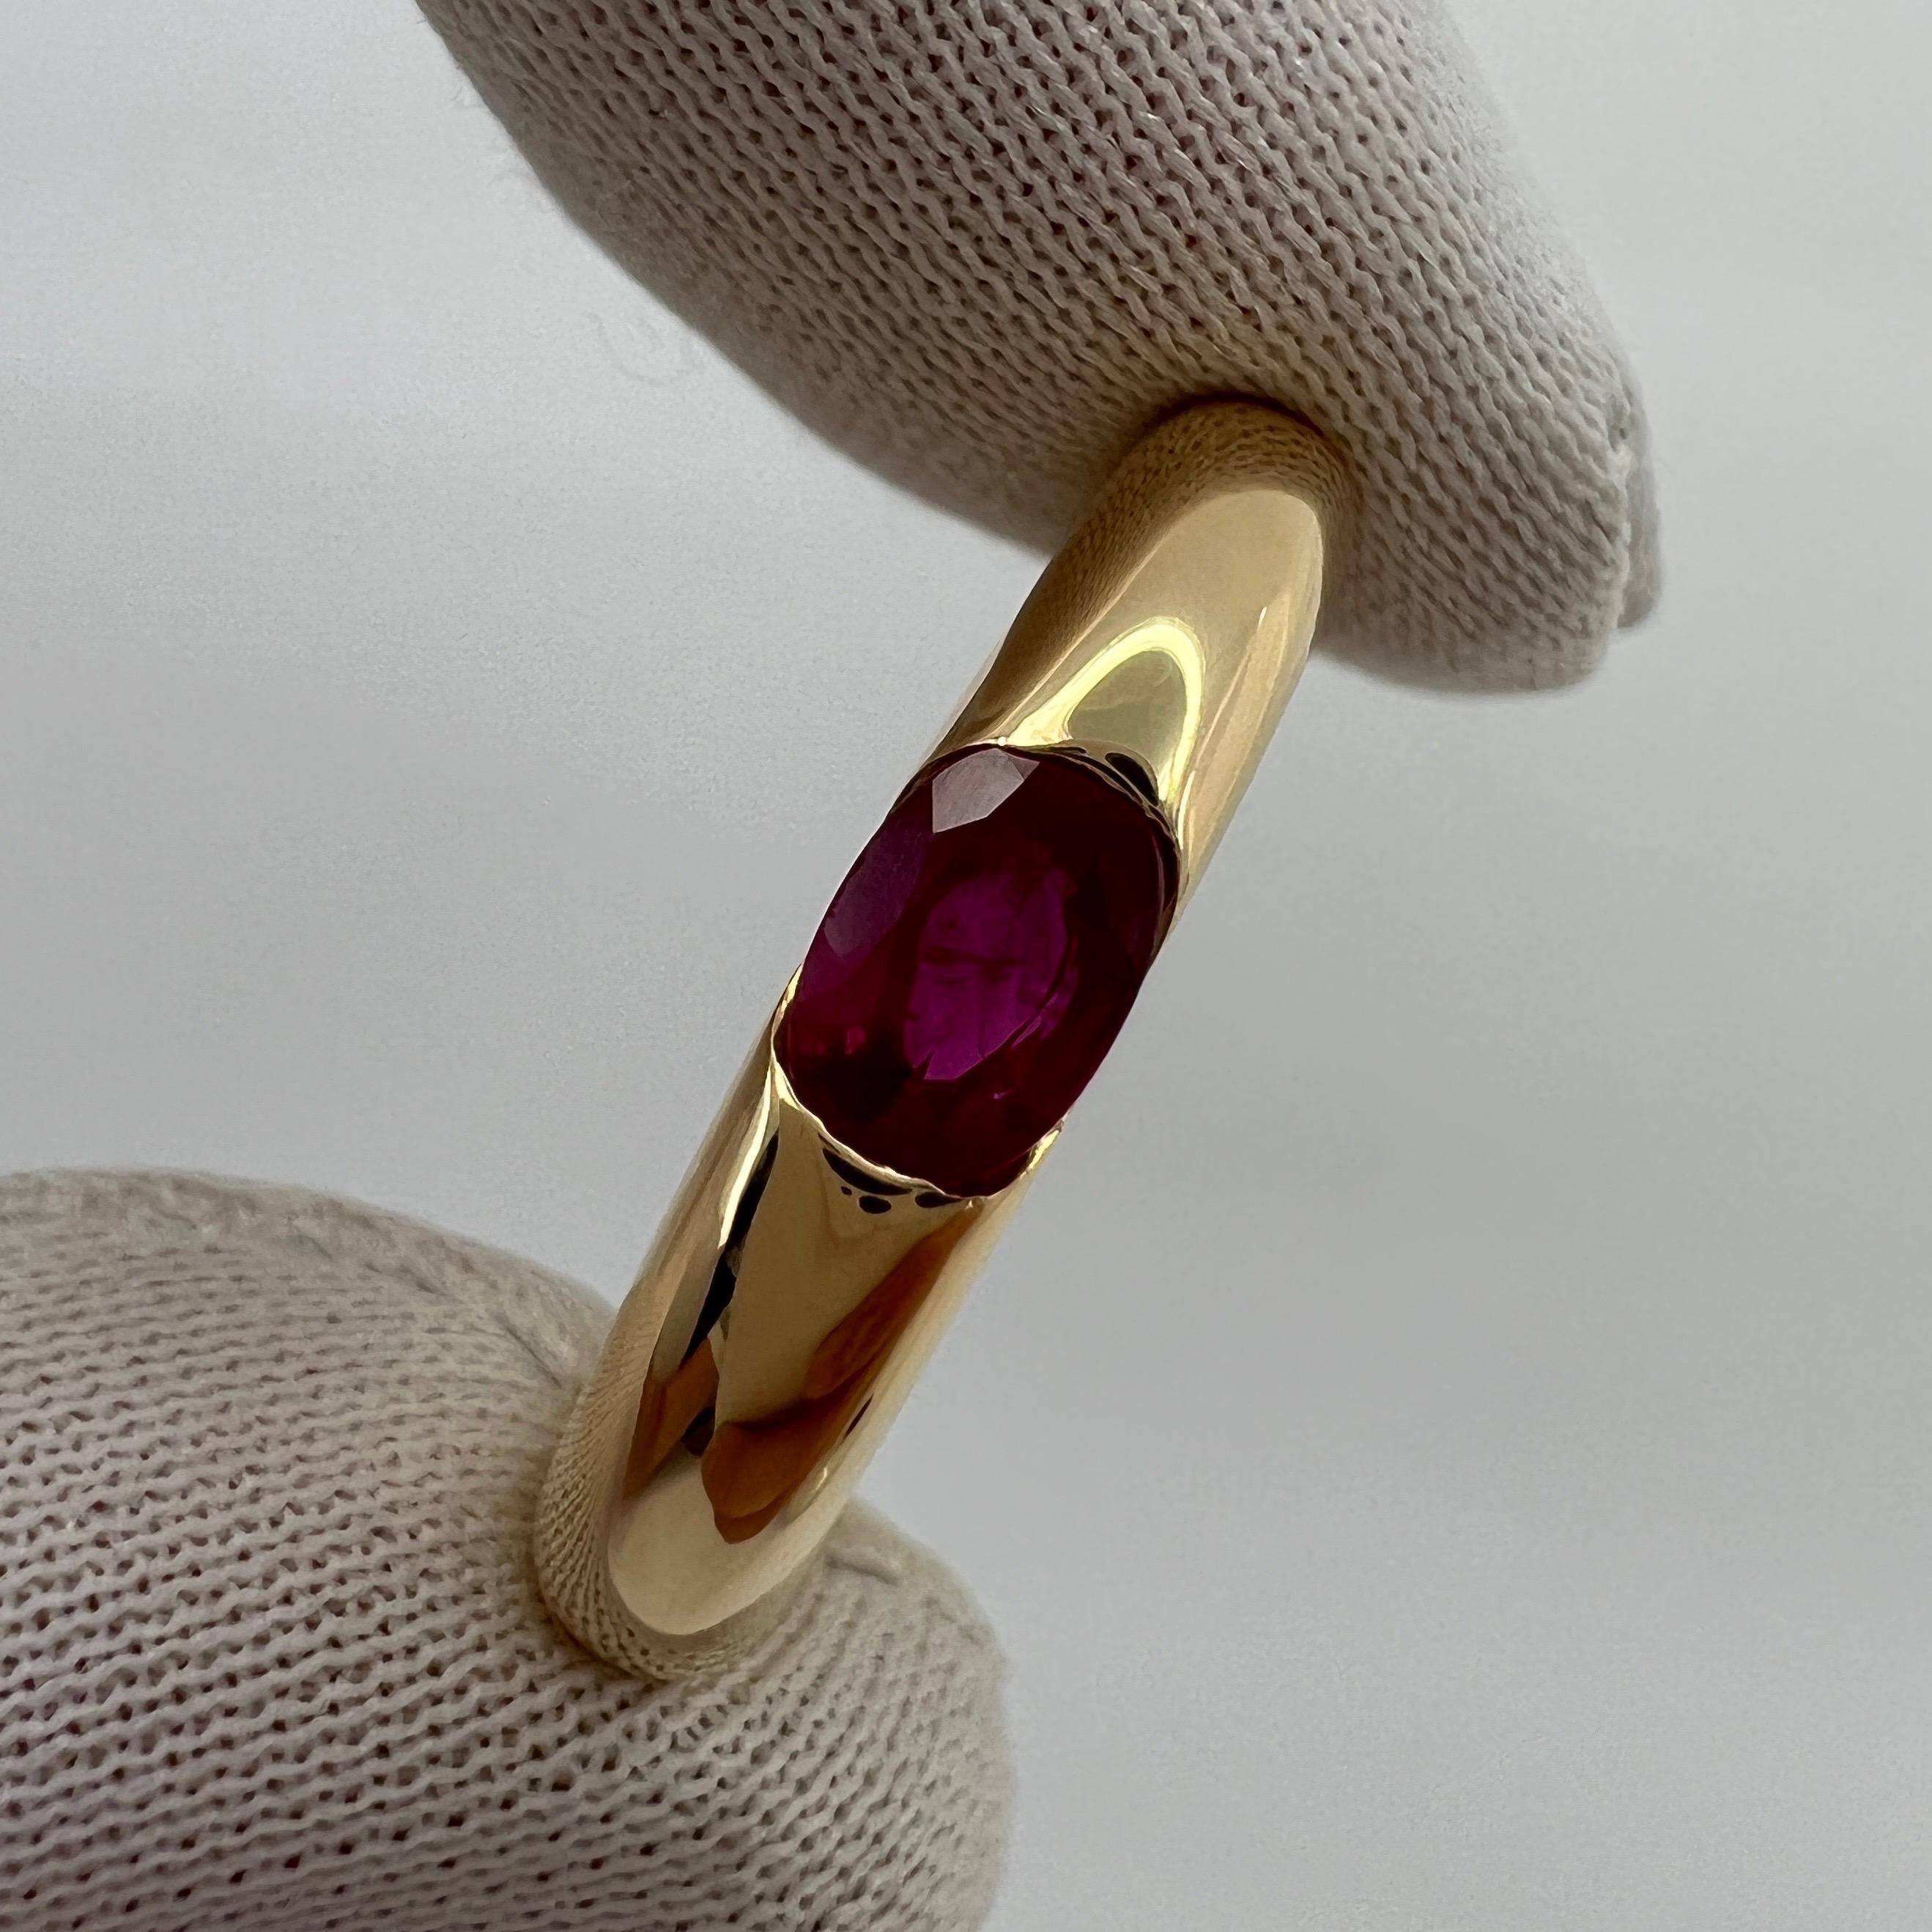 Vintage Cartier Deep Red Ruby Ellipse 18k Yellow Gold Oval Solitaire Ring 49 US5 For Sale 1